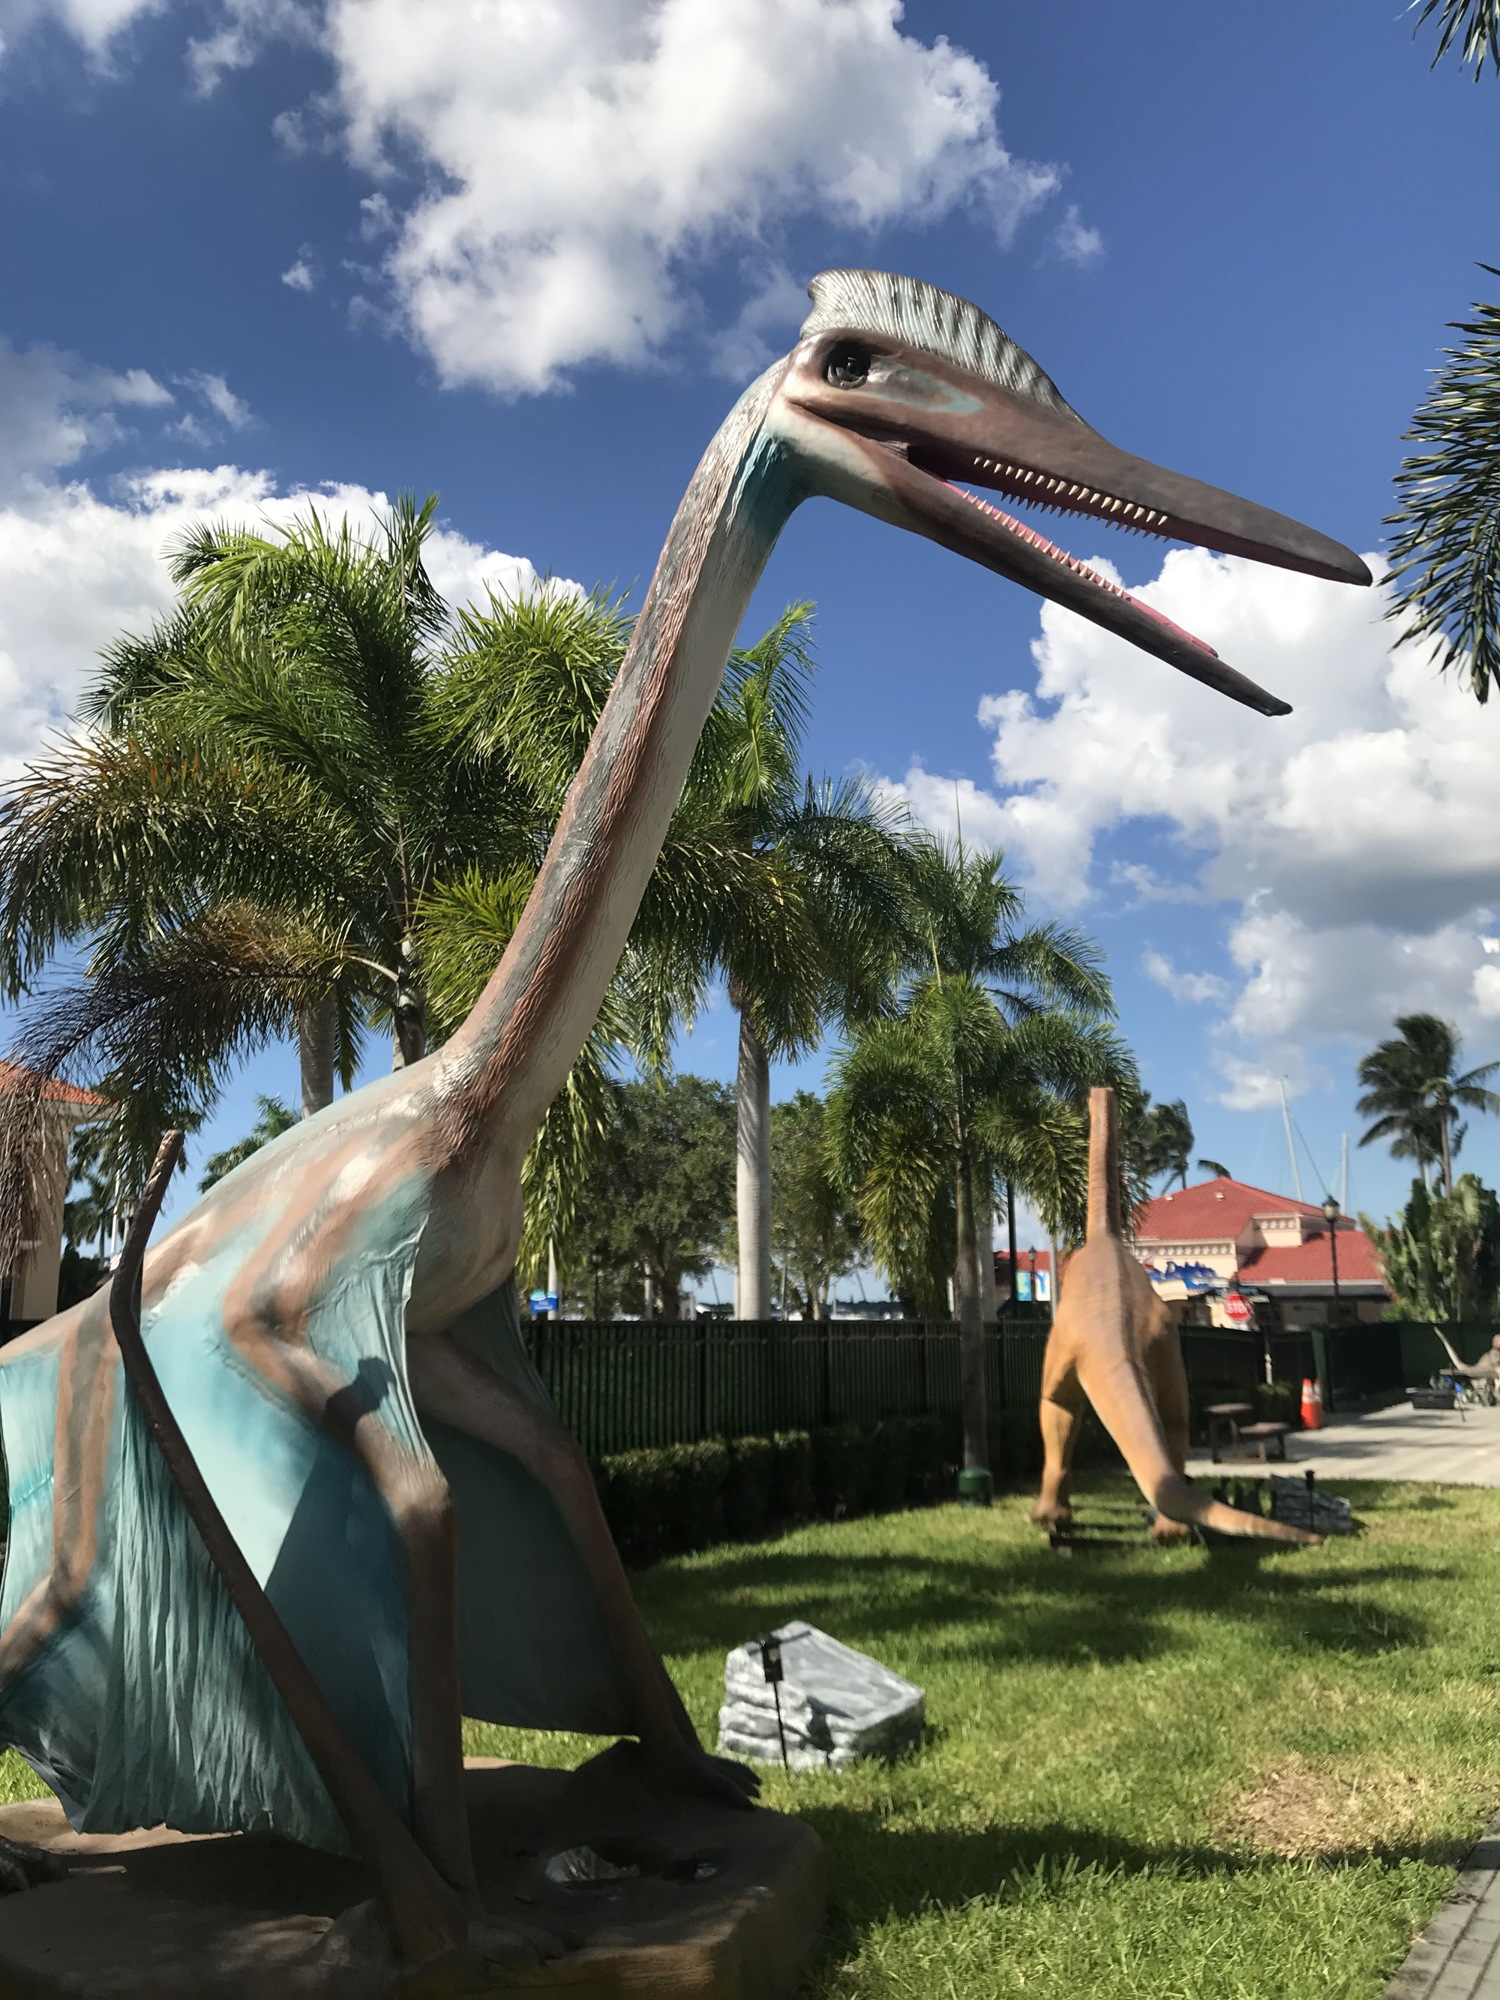 The massive Quetzalcoatlus is one of the first things you'll encounter.